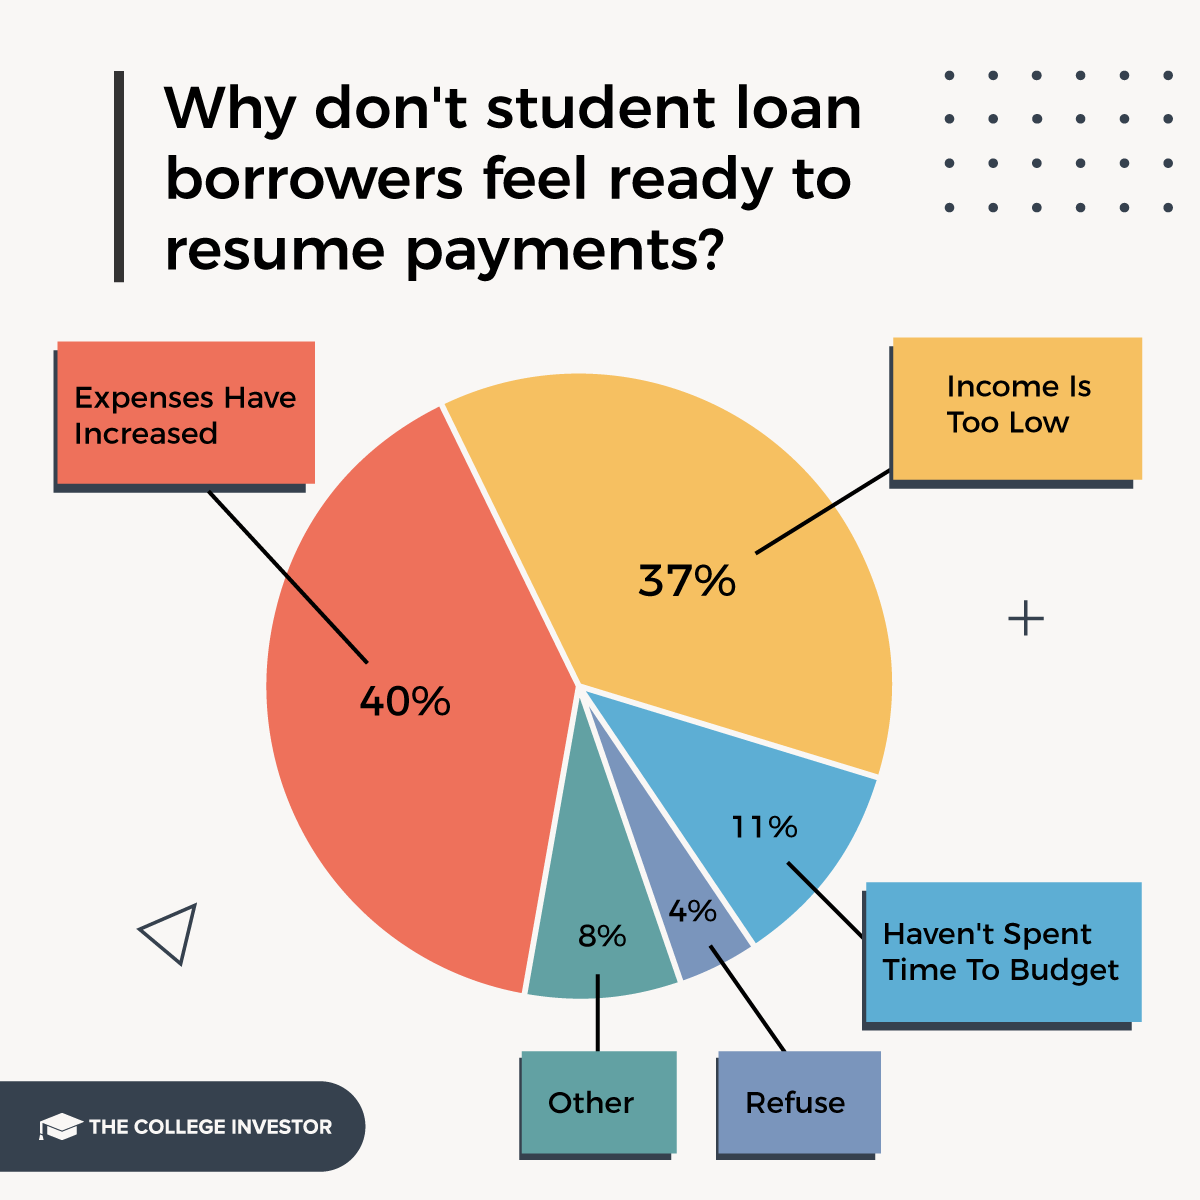 Why don't student loan borrowers feel ready to resume payments